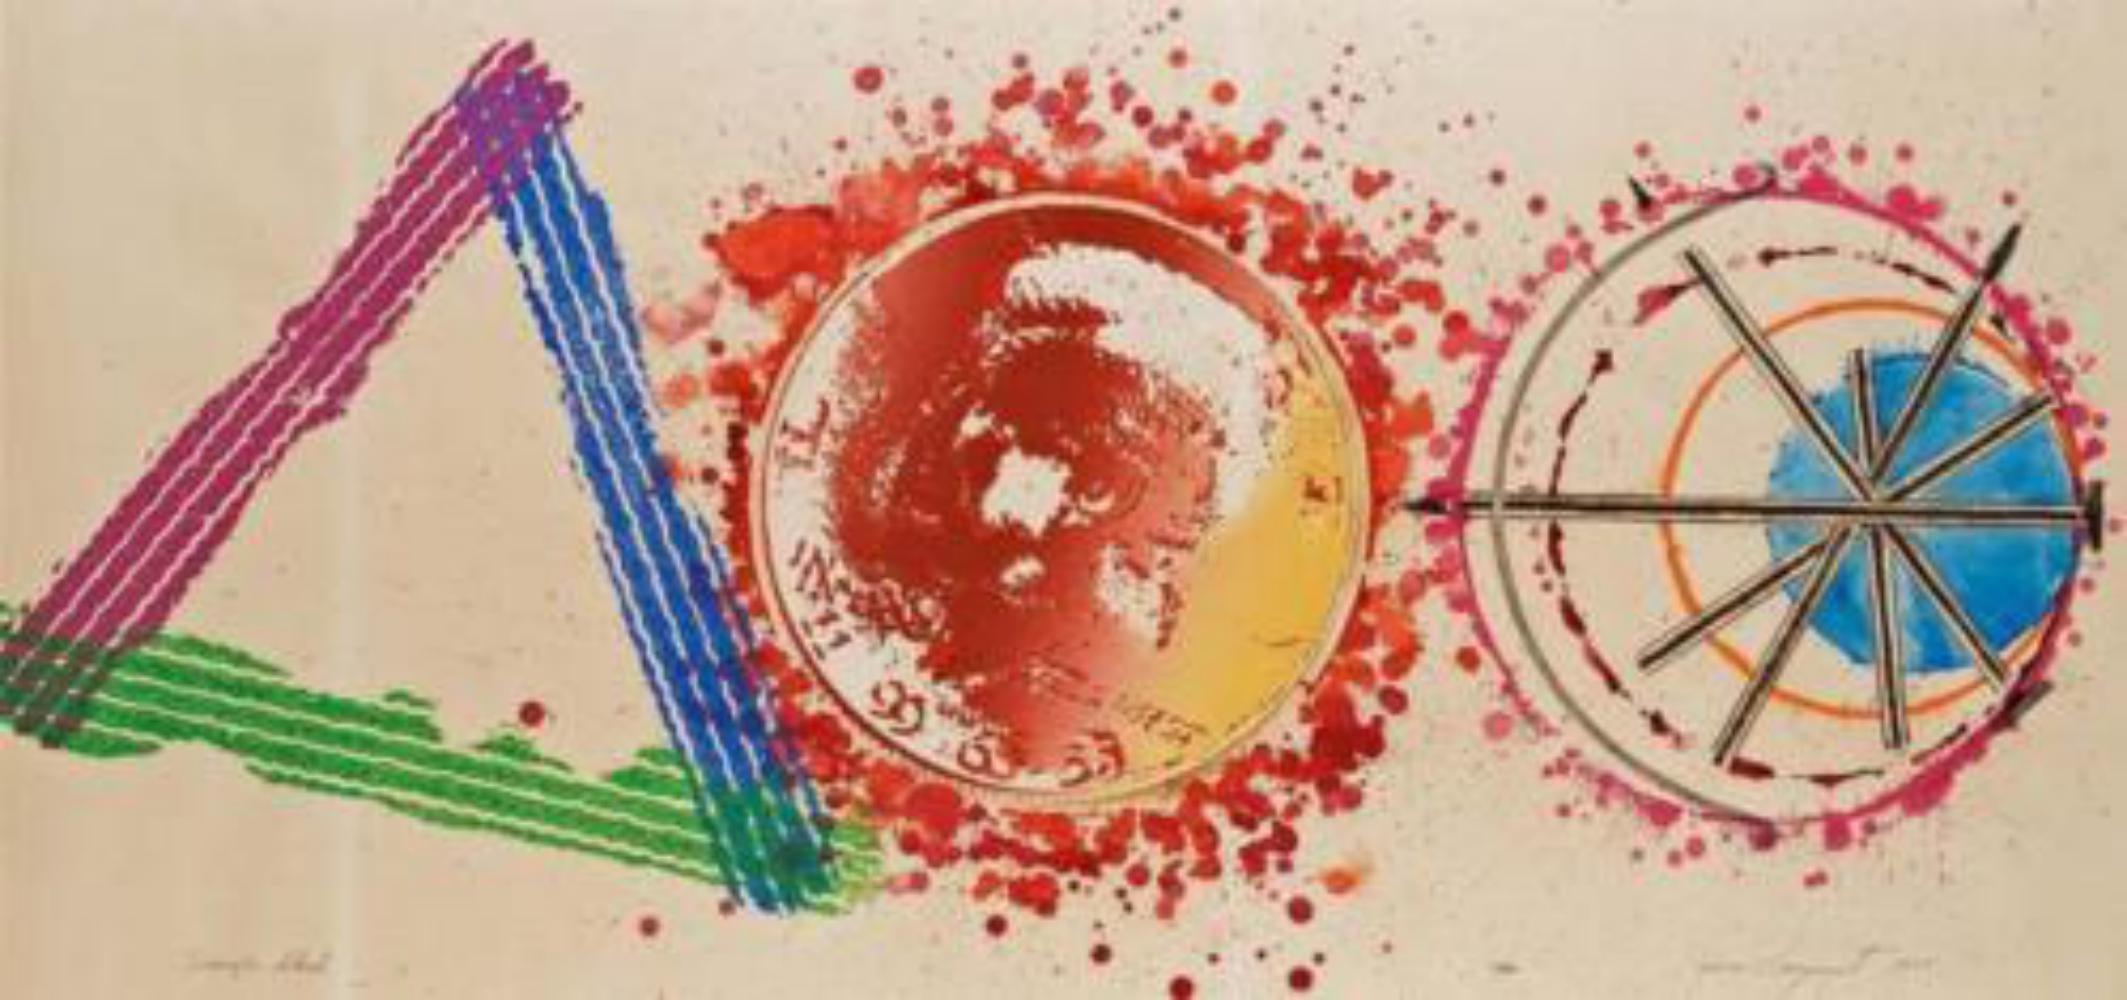 Triangle Skid (the Assassination of President Kennedy) - Mixed Media Art by James Rosenquist